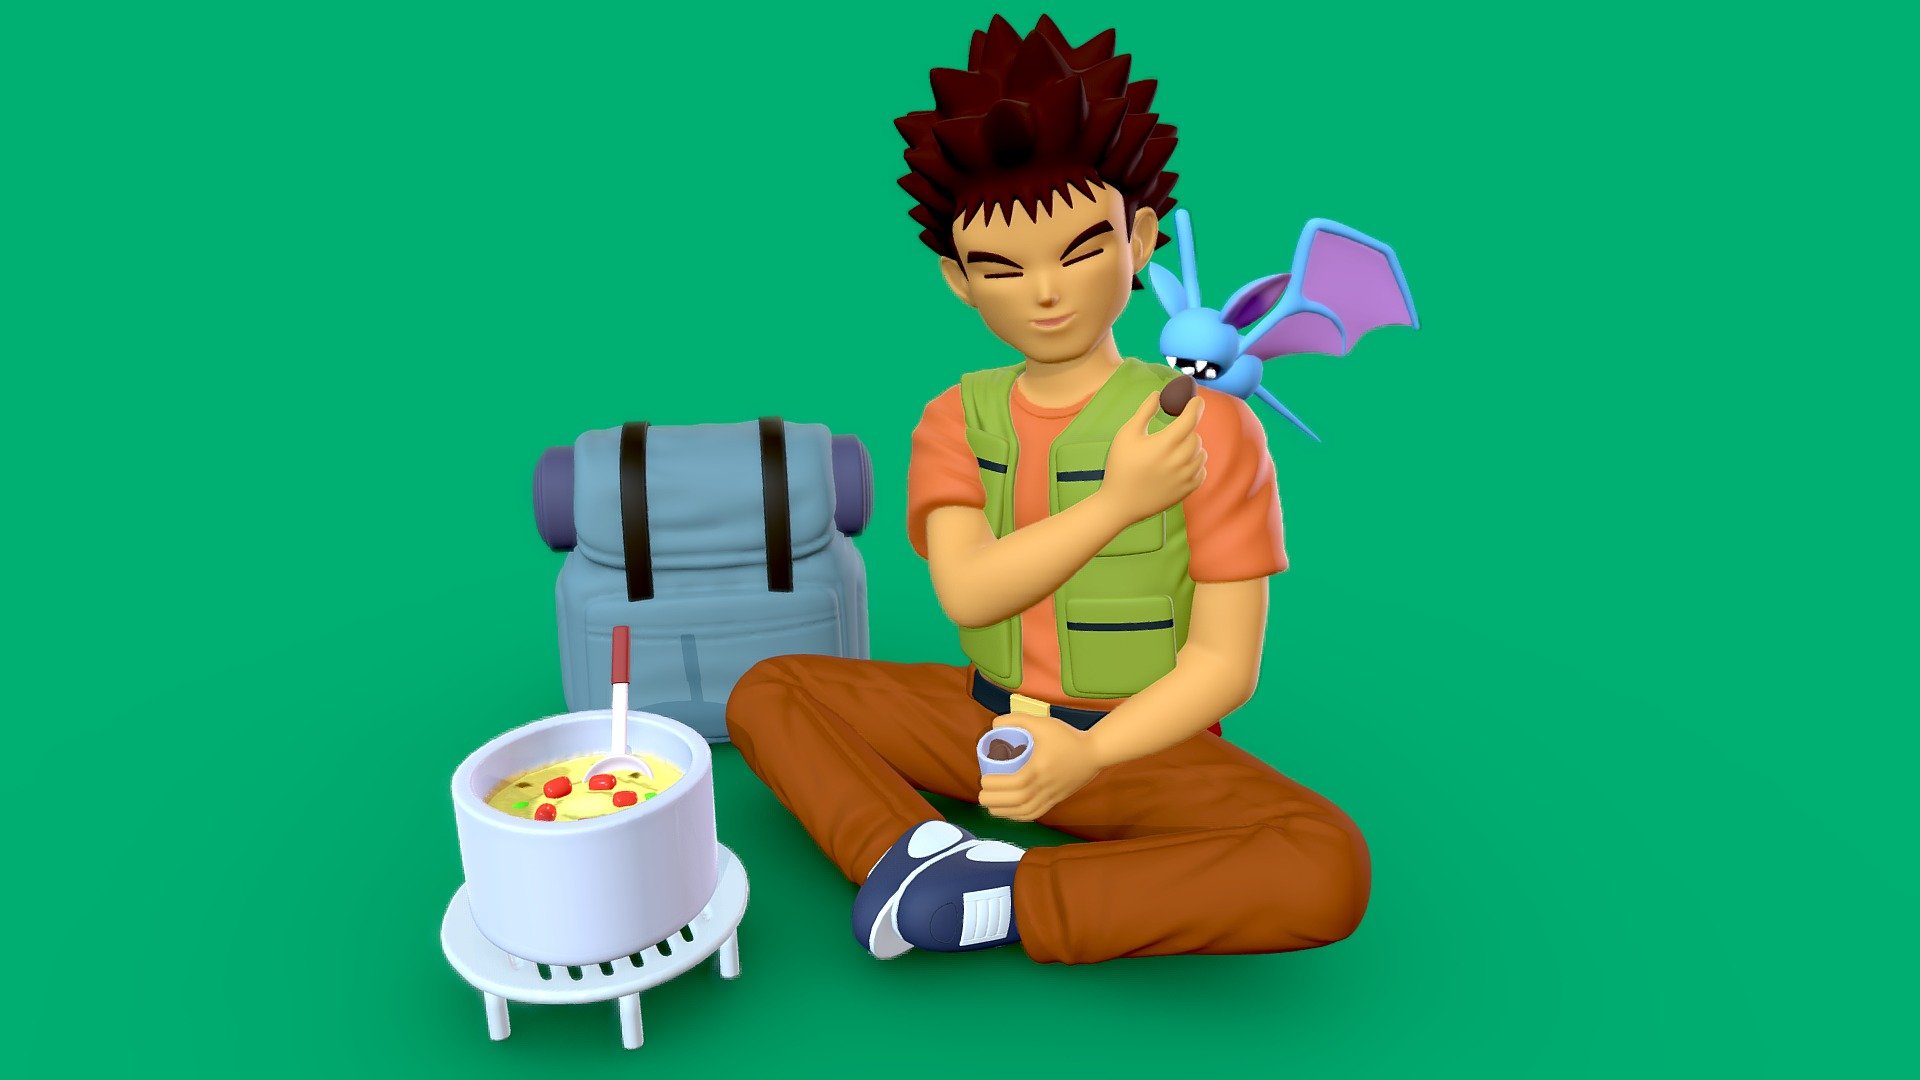 Brock cooking, ready for 3D printing!

Why did I create this model?

An image of brock feeding his pokemon, inspired me to make this model, brought me a nostalgic feeling of my childhood times. Hope you like this model!



Who is Brock?

Brock is originally the Gym Leader of Pewter City Gym but he decided to follow his dream to become the greatest Pokémon Breeder. After his defeat against Ash Ketchum, he quickly gave up his title. He accompanied Ash on his journey for quite some time, all while trying to live up to his goal. He currently wishes to be a great Pokémon Doctor. He has travelled with Ash from Kanto to Sinnoh. He is one of the main characters in the series.

Image Gallery

 - Brock cooking - Pokemon - 3D PRINT - Buy Royalty Free 3D model by LessaB3D (@thiagolessa90) 3d model